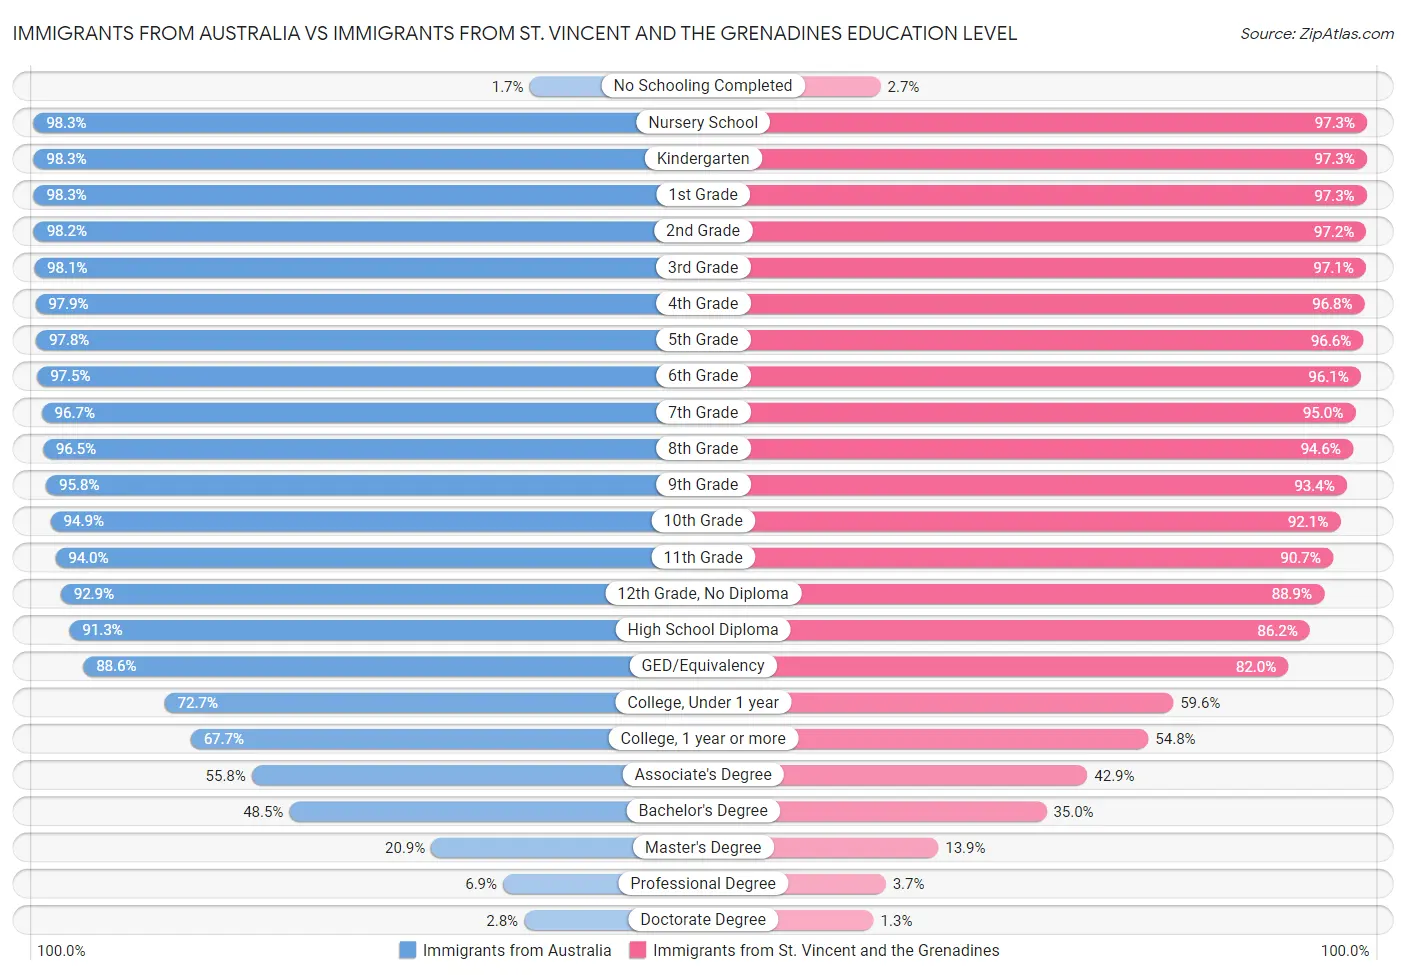 Immigrants from Australia vs Immigrants from St. Vincent and the Grenadines Education Level